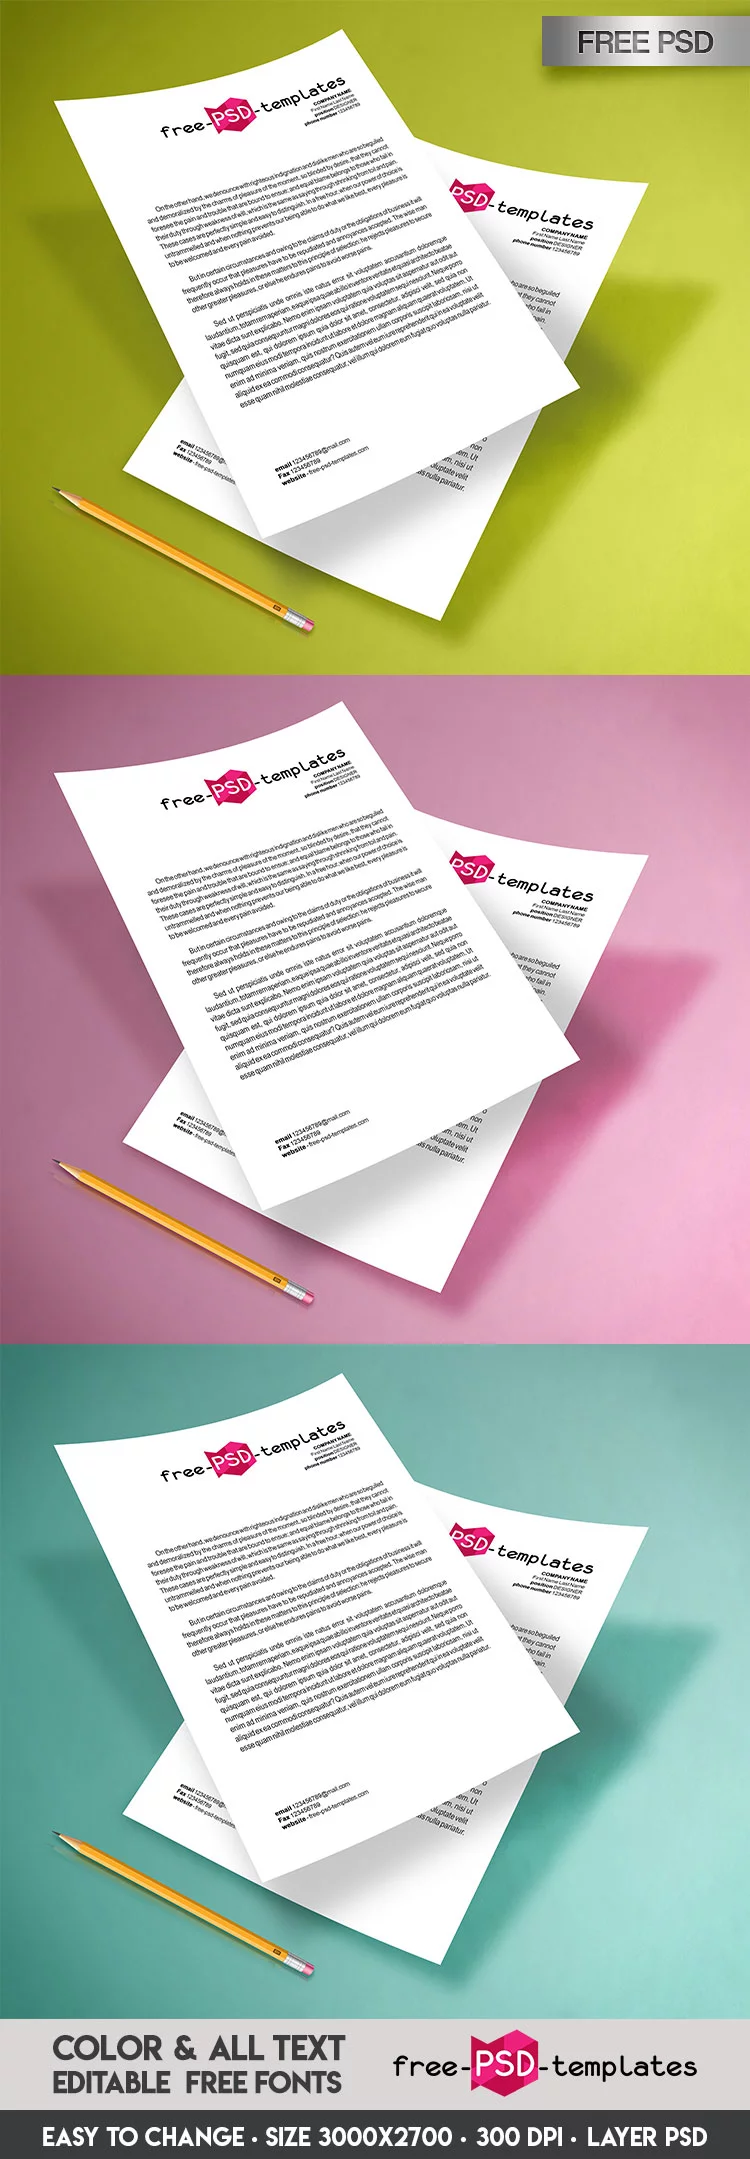 Free A4 Paper Mockup IN PSD